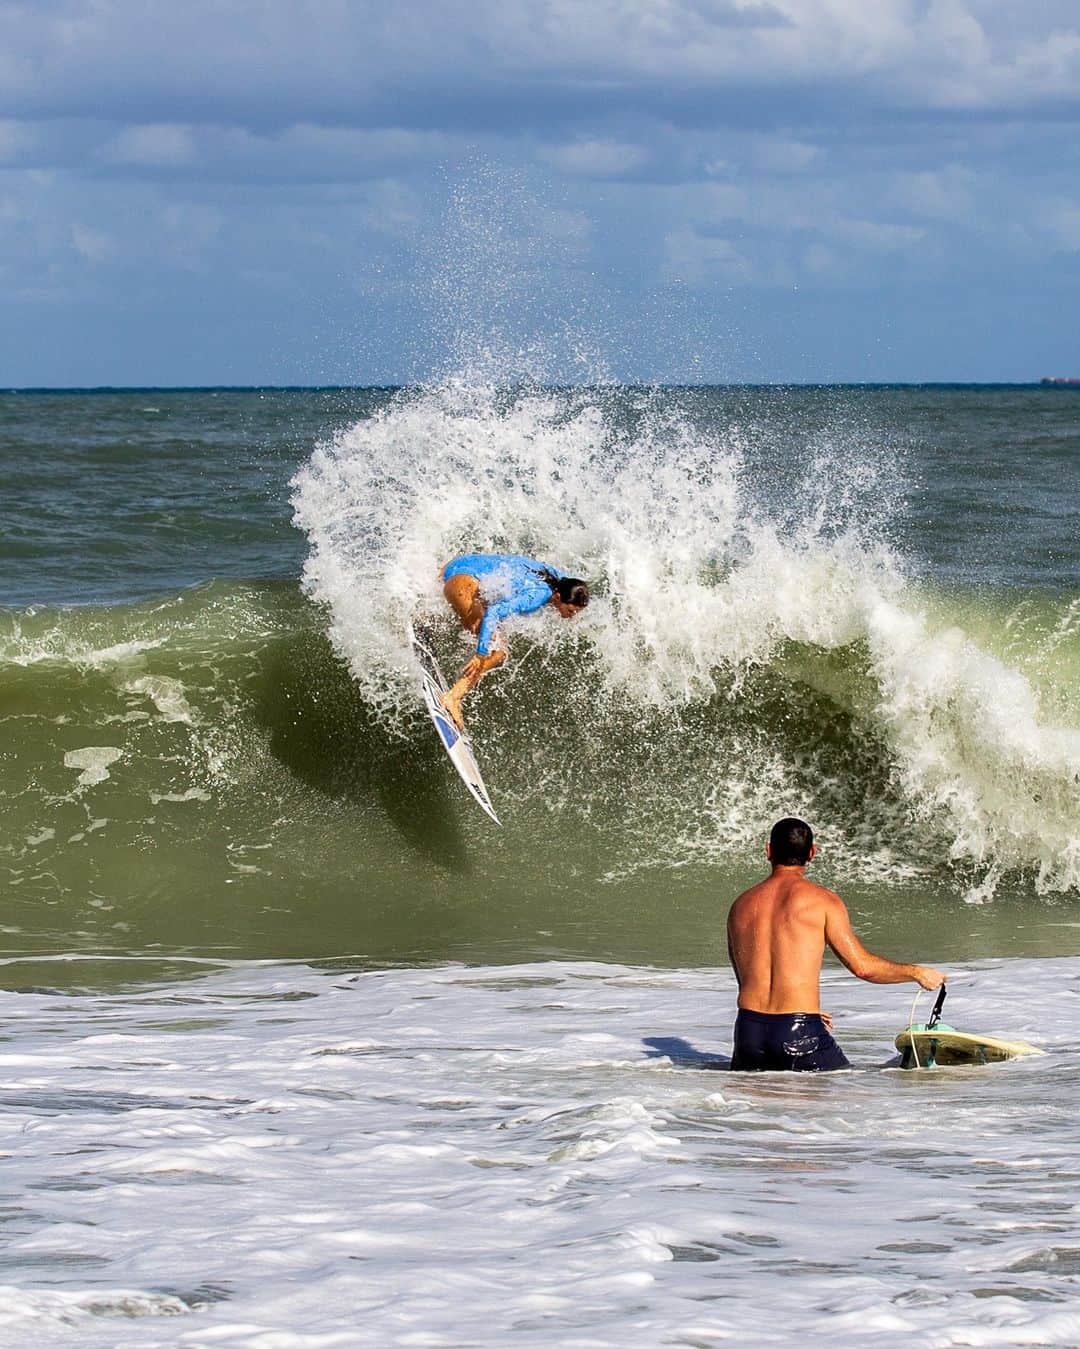 surflineのインスタグラム：「There’s been waves on the East Coast ever since Tammy blew out to sea. There’s just been a lot more wind. Which, as it turns out, hasn’t been a problem at all for surfers in the Deep South.   “In South Florida, we go long periods of time with no waves, so it’s always a privilege when we do get waves,” says Jupiter shredder, @elliebarimo_ . “I recently moved to Southern California, but luckily I came home during this little windswell and scored some good beachbreaks around my hometown. It was great surfing fun little barrels in warm water with friends.”   📸 @sikpixx   Moments: Friends with Wind Chop now playing at the link in bio.」